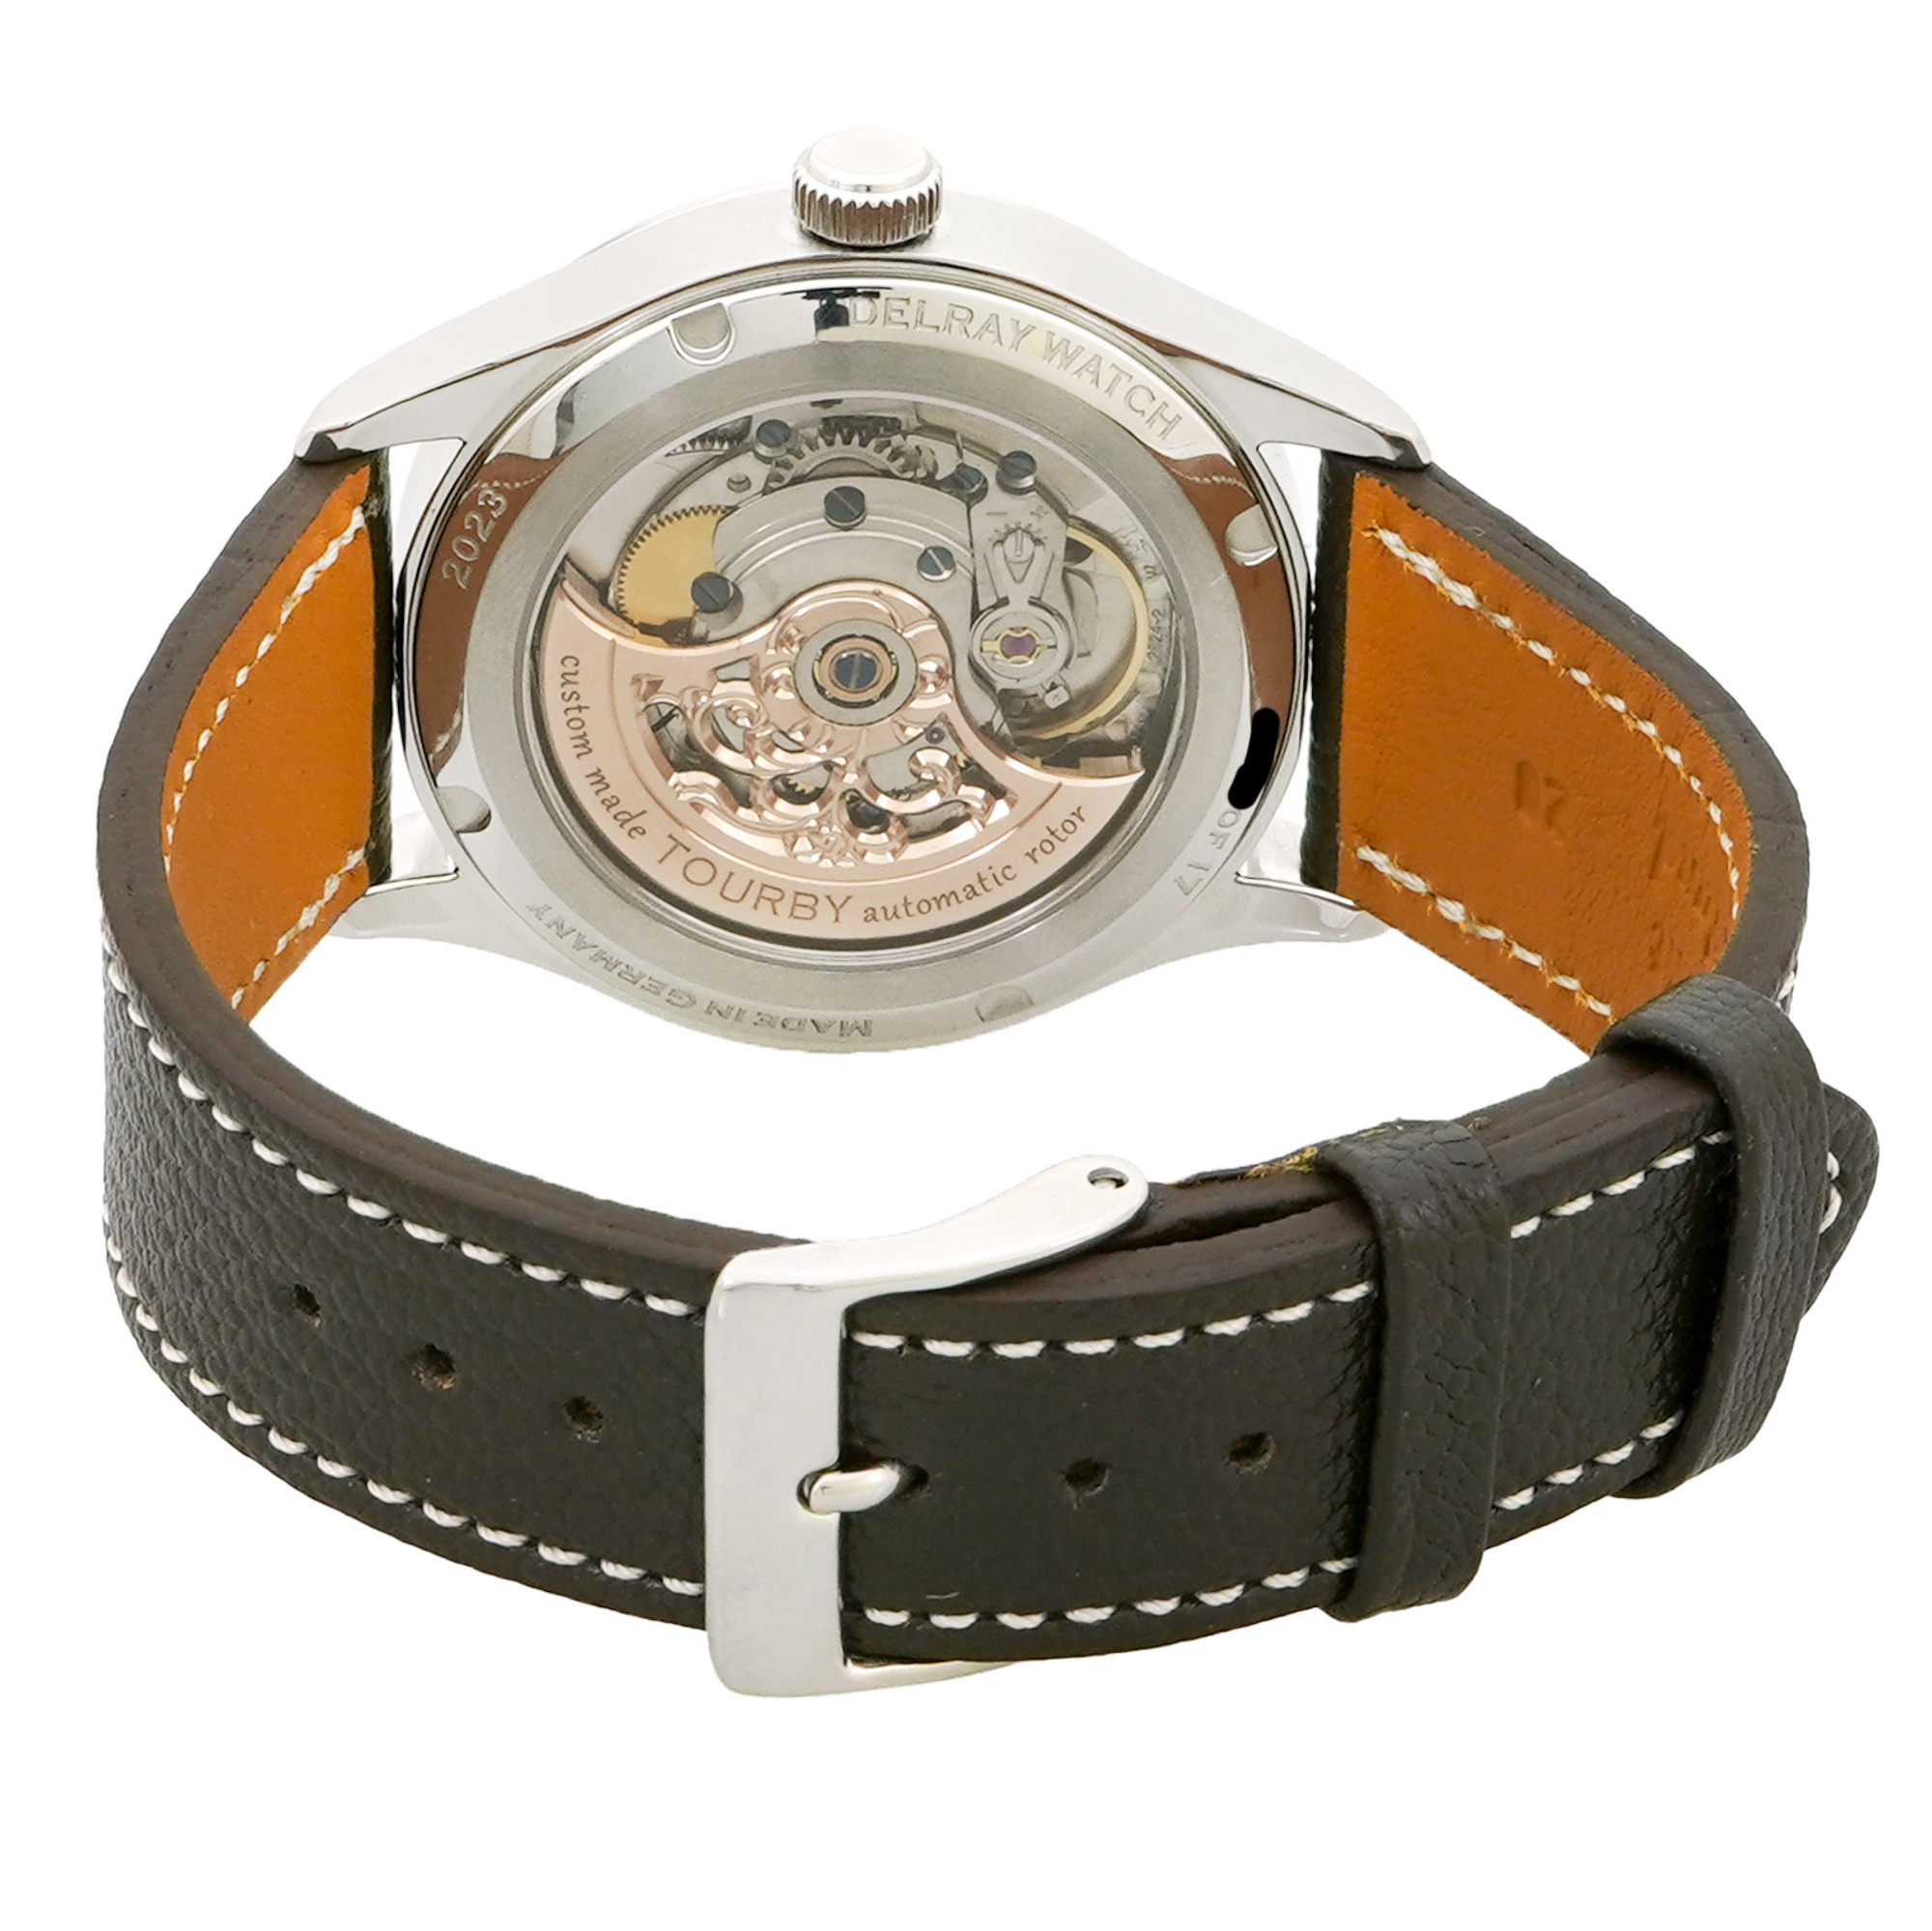 Tourby X Delray Watch Limited Edition Aventurine Dial - Inventory 4298